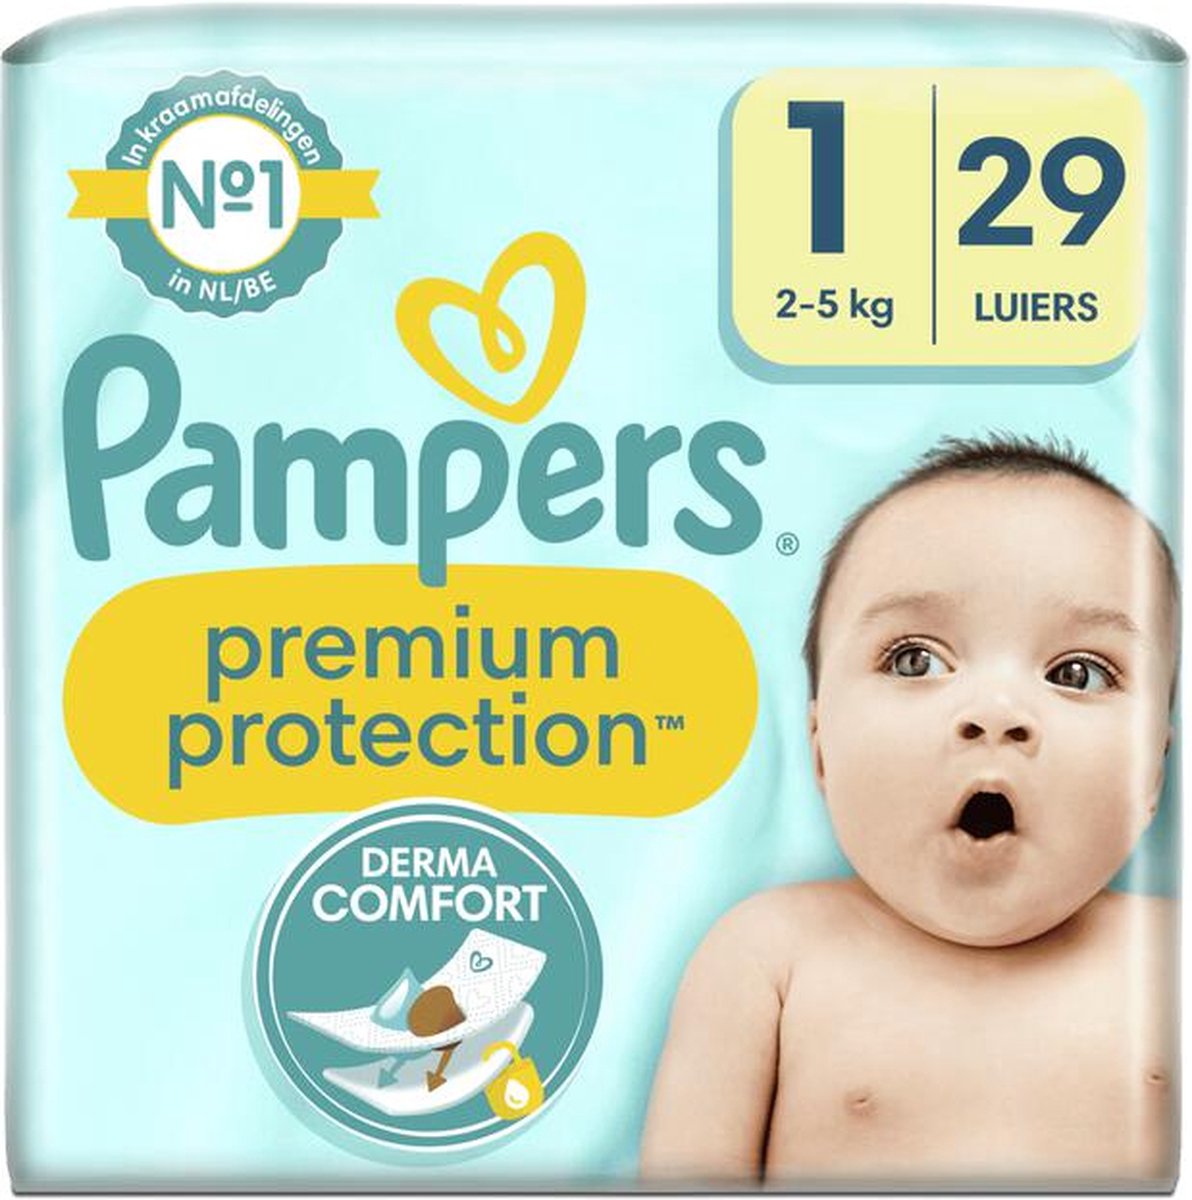 Pampers Premium Protection Taille 3 6-10kg 102 pièces